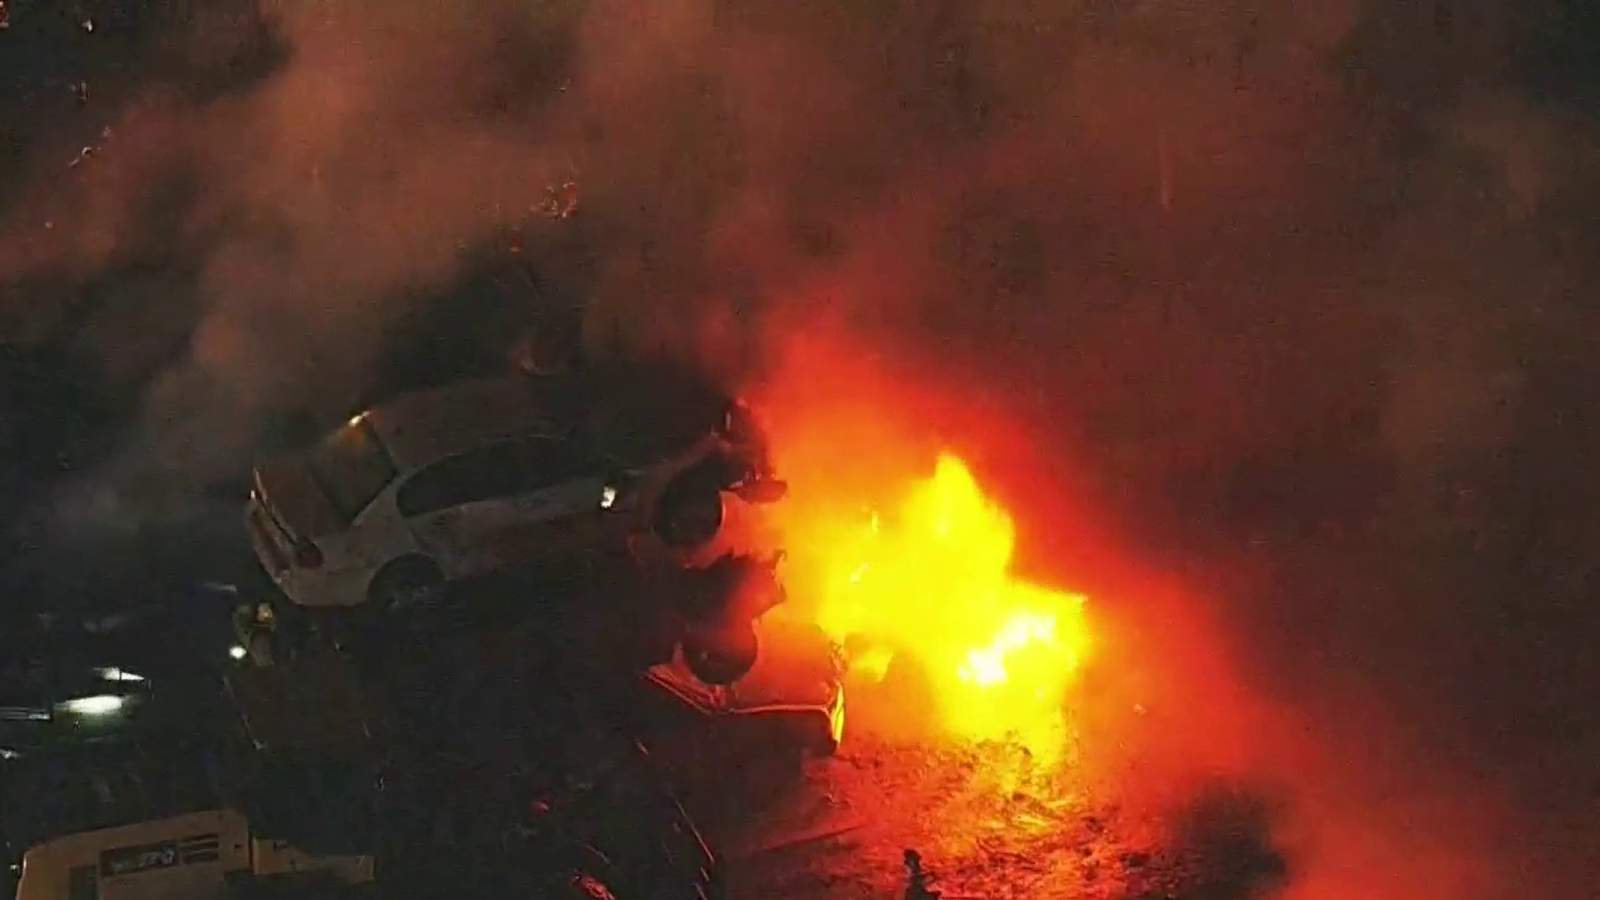 Scrap vehicles catch fire at Brevard County recycling plant